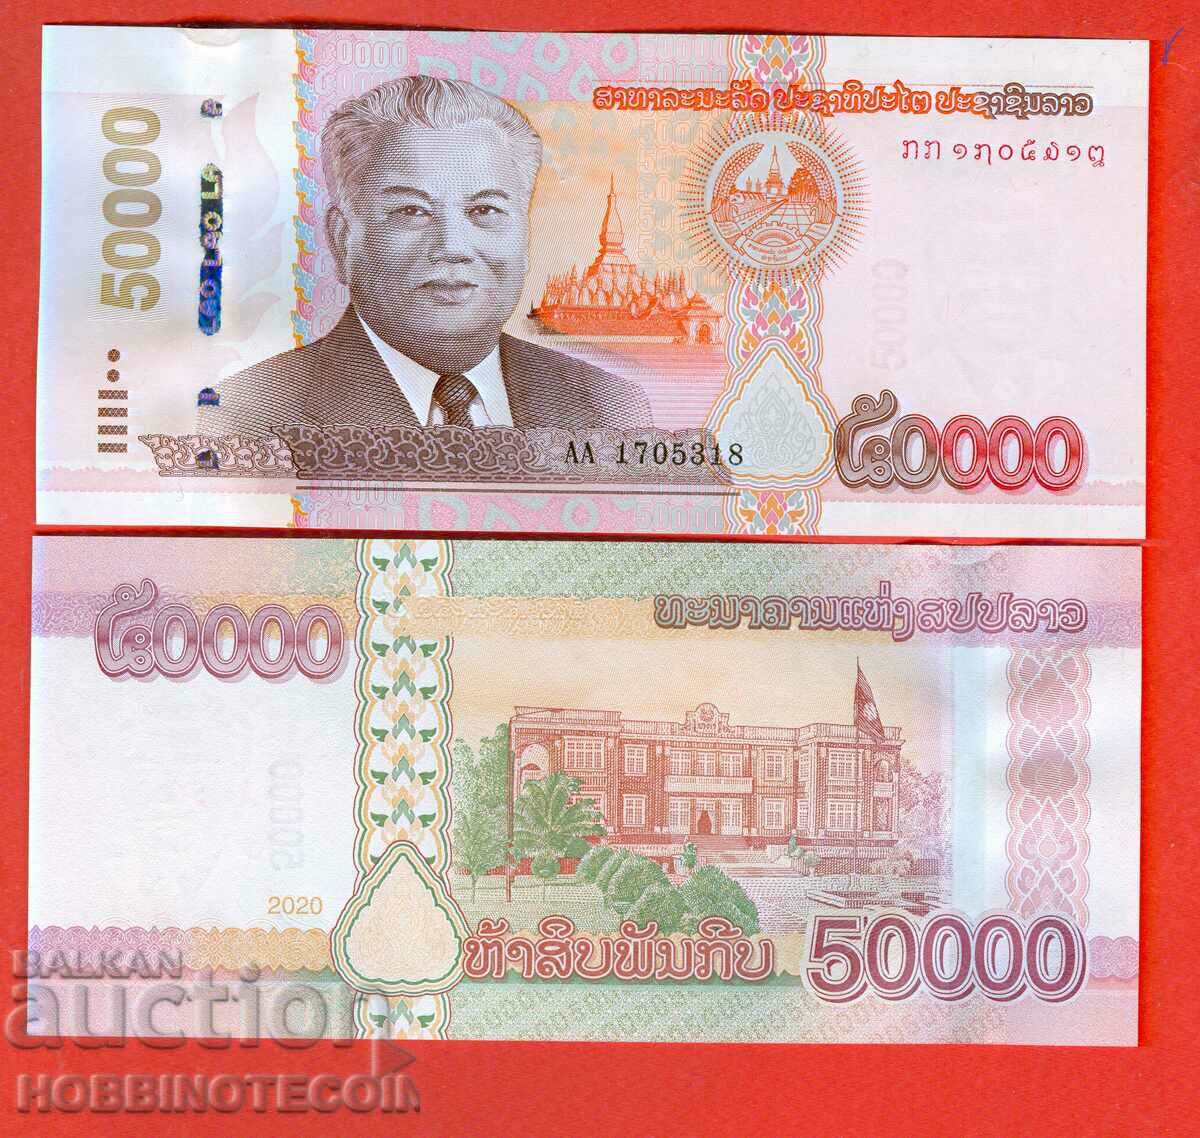 LAOS LAO 50000 50 000 Kip issue issue 2020 2022 NEW UNC